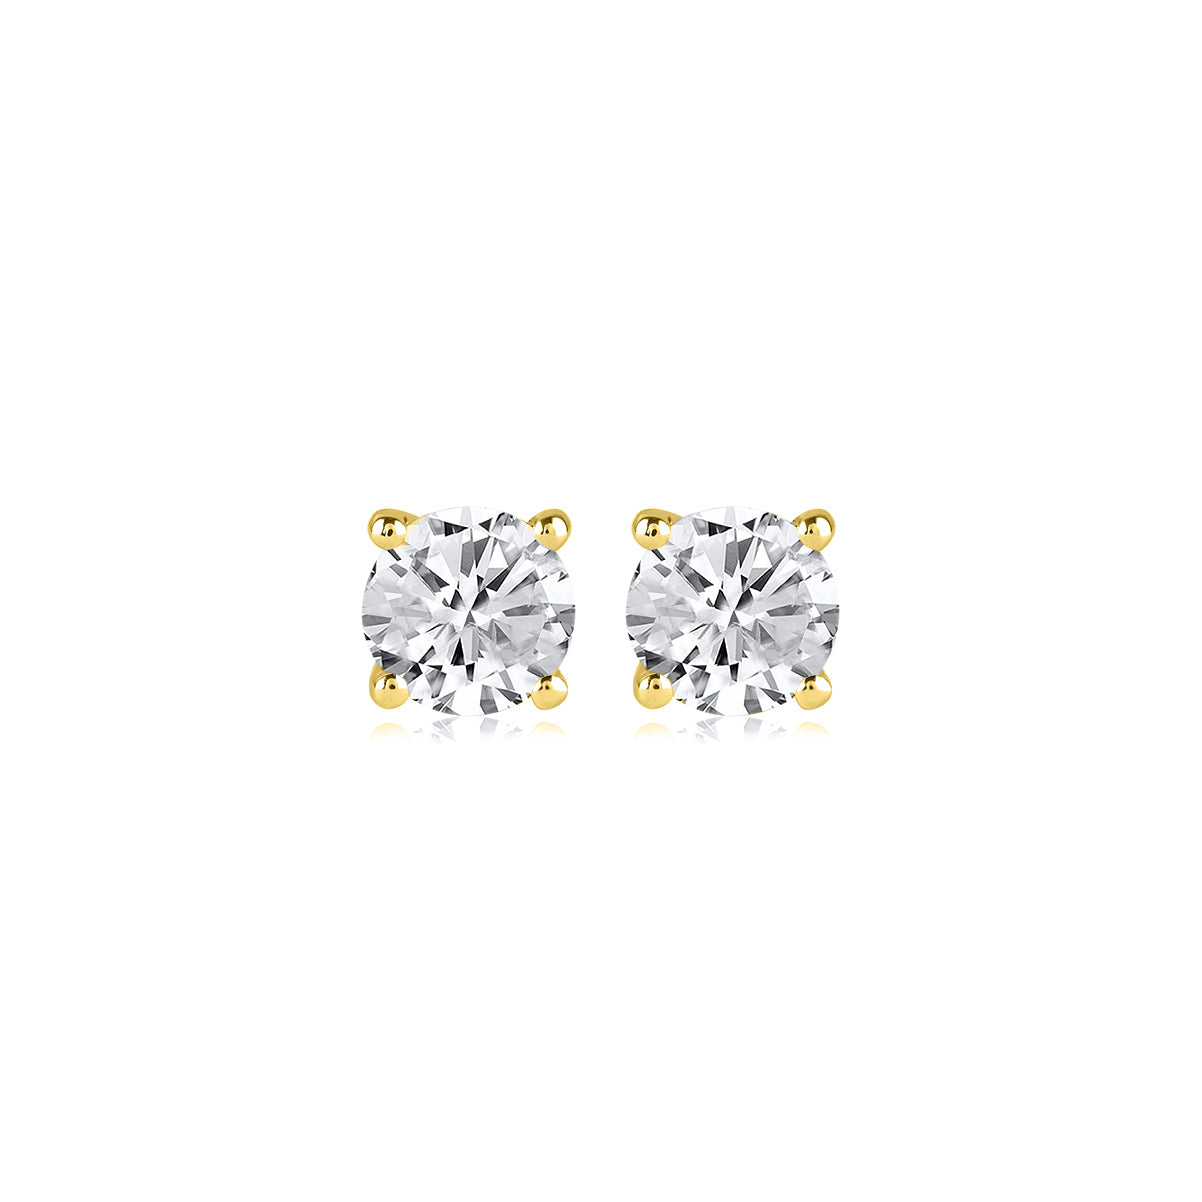 1.33 Carat Solitaire Stud Earrings with Friction Back in 14K Gold